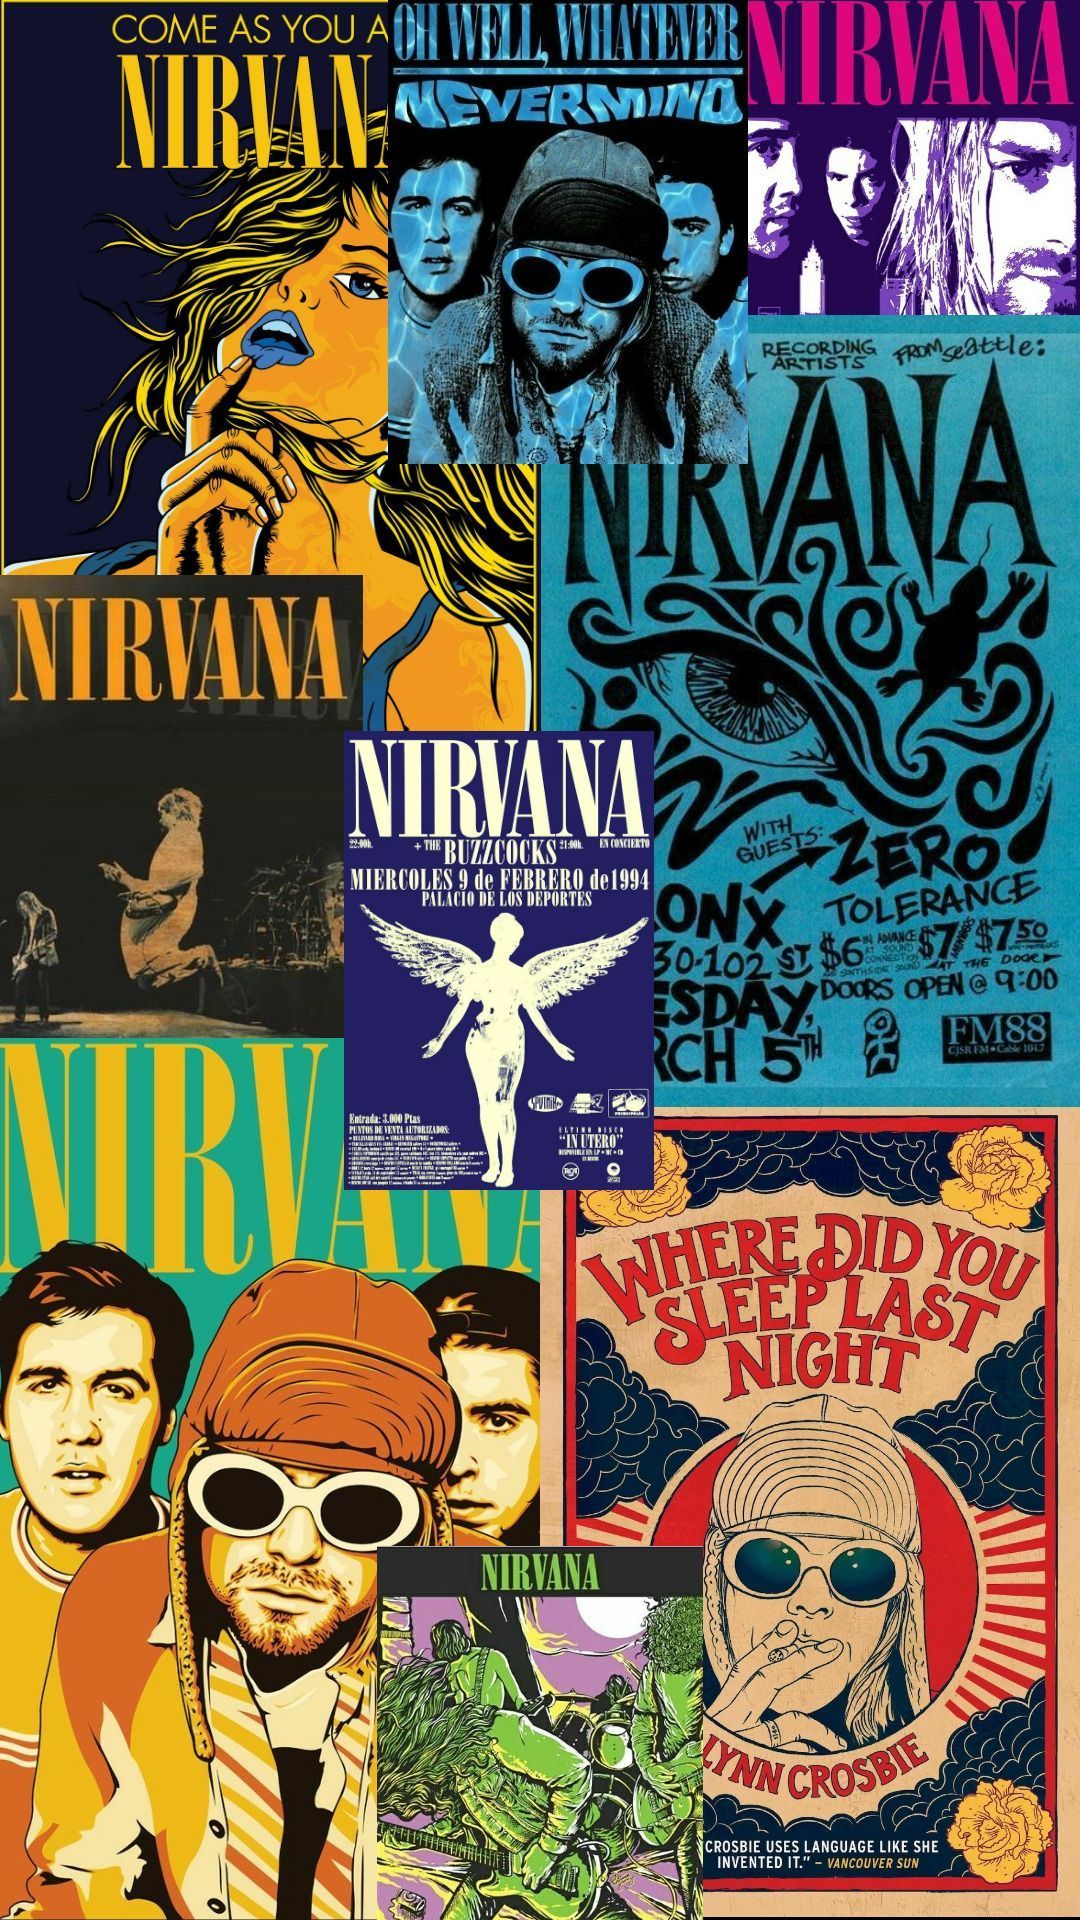 Nirvana iPhone Wallpaper with high-resolution 1080x1920 pixel. You can use this wallpaper for your iPhone 5, 6, 7, 8, X, XS, XR backgrounds, Mobile Screensaver, or iPad Lock Screen - Rock, Nirvana